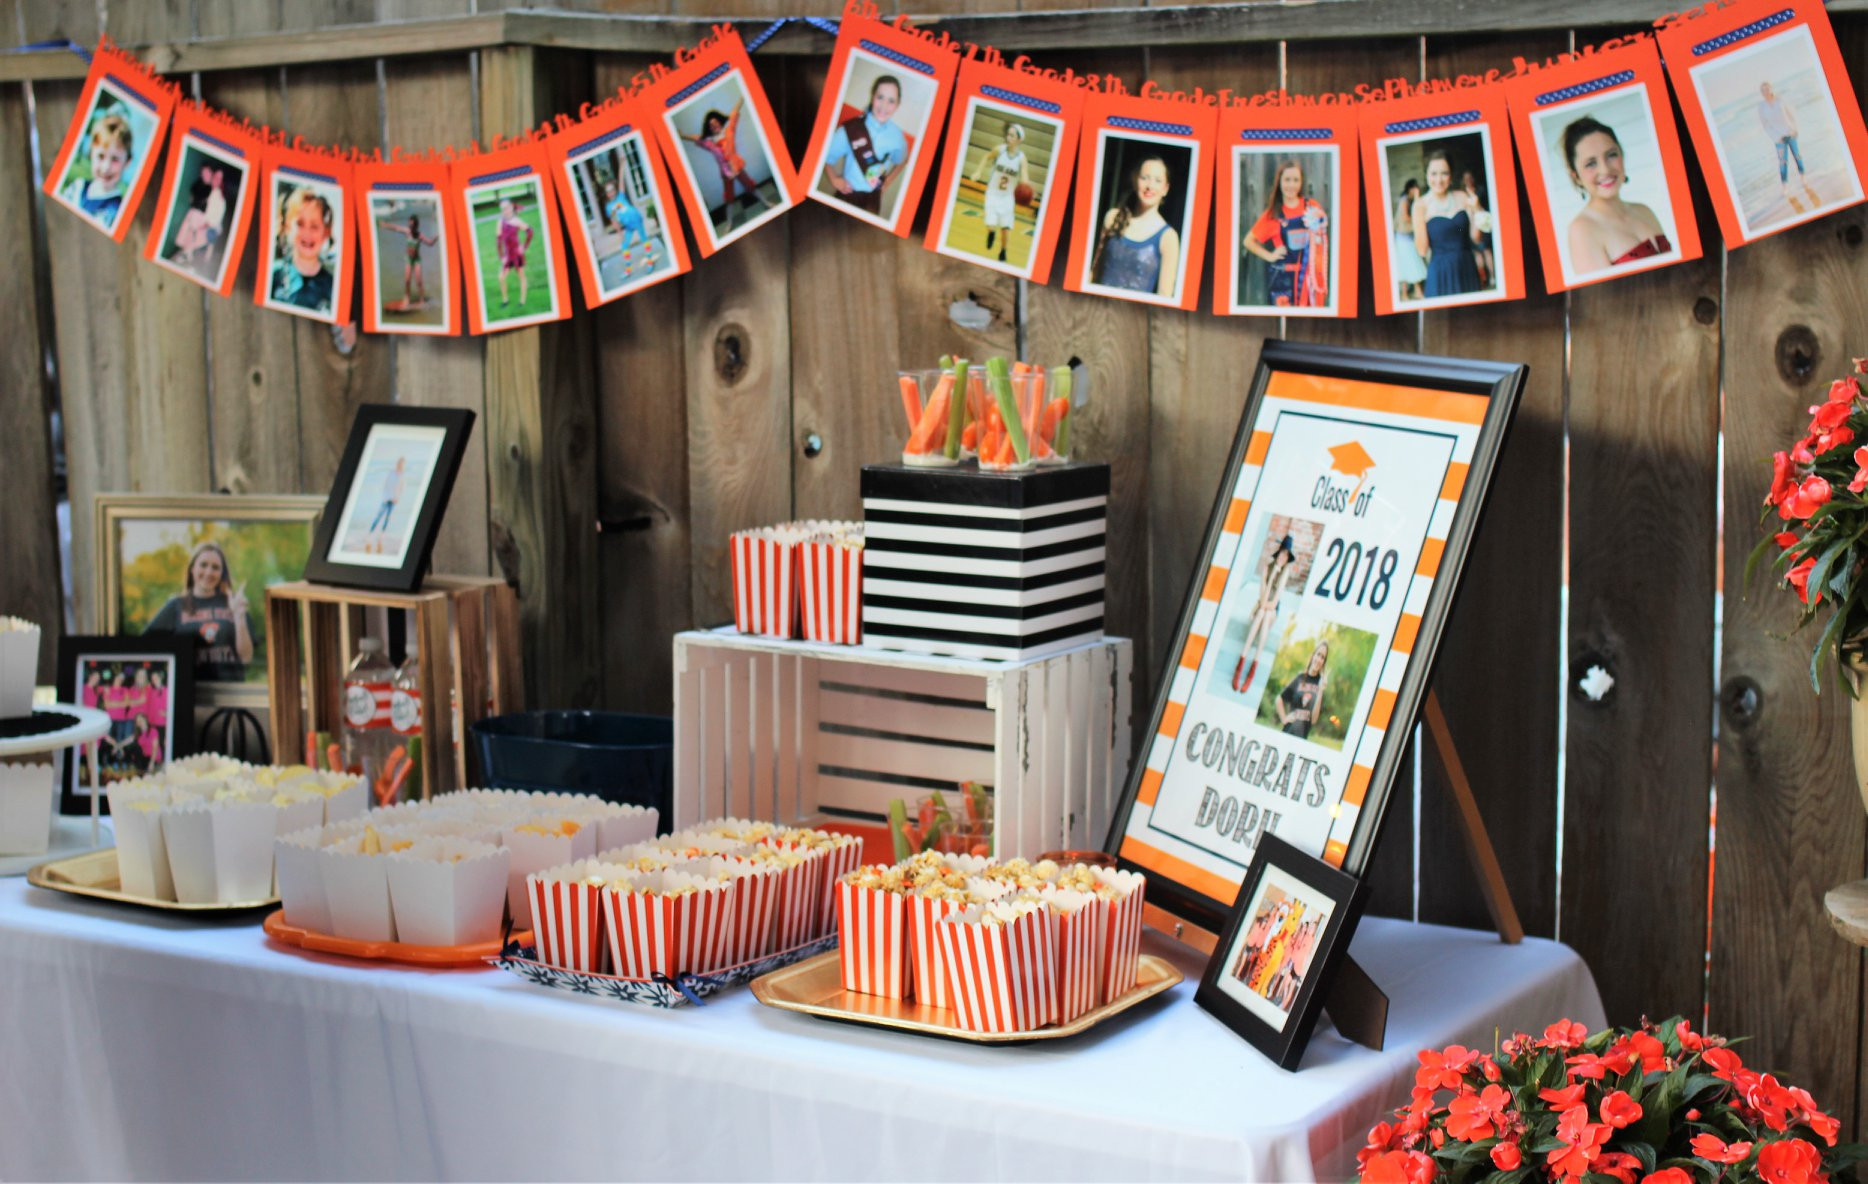 Party Ideas For Graduation Party
 Graduation Party Ideas How to Celebrate Your Senior s Big Day